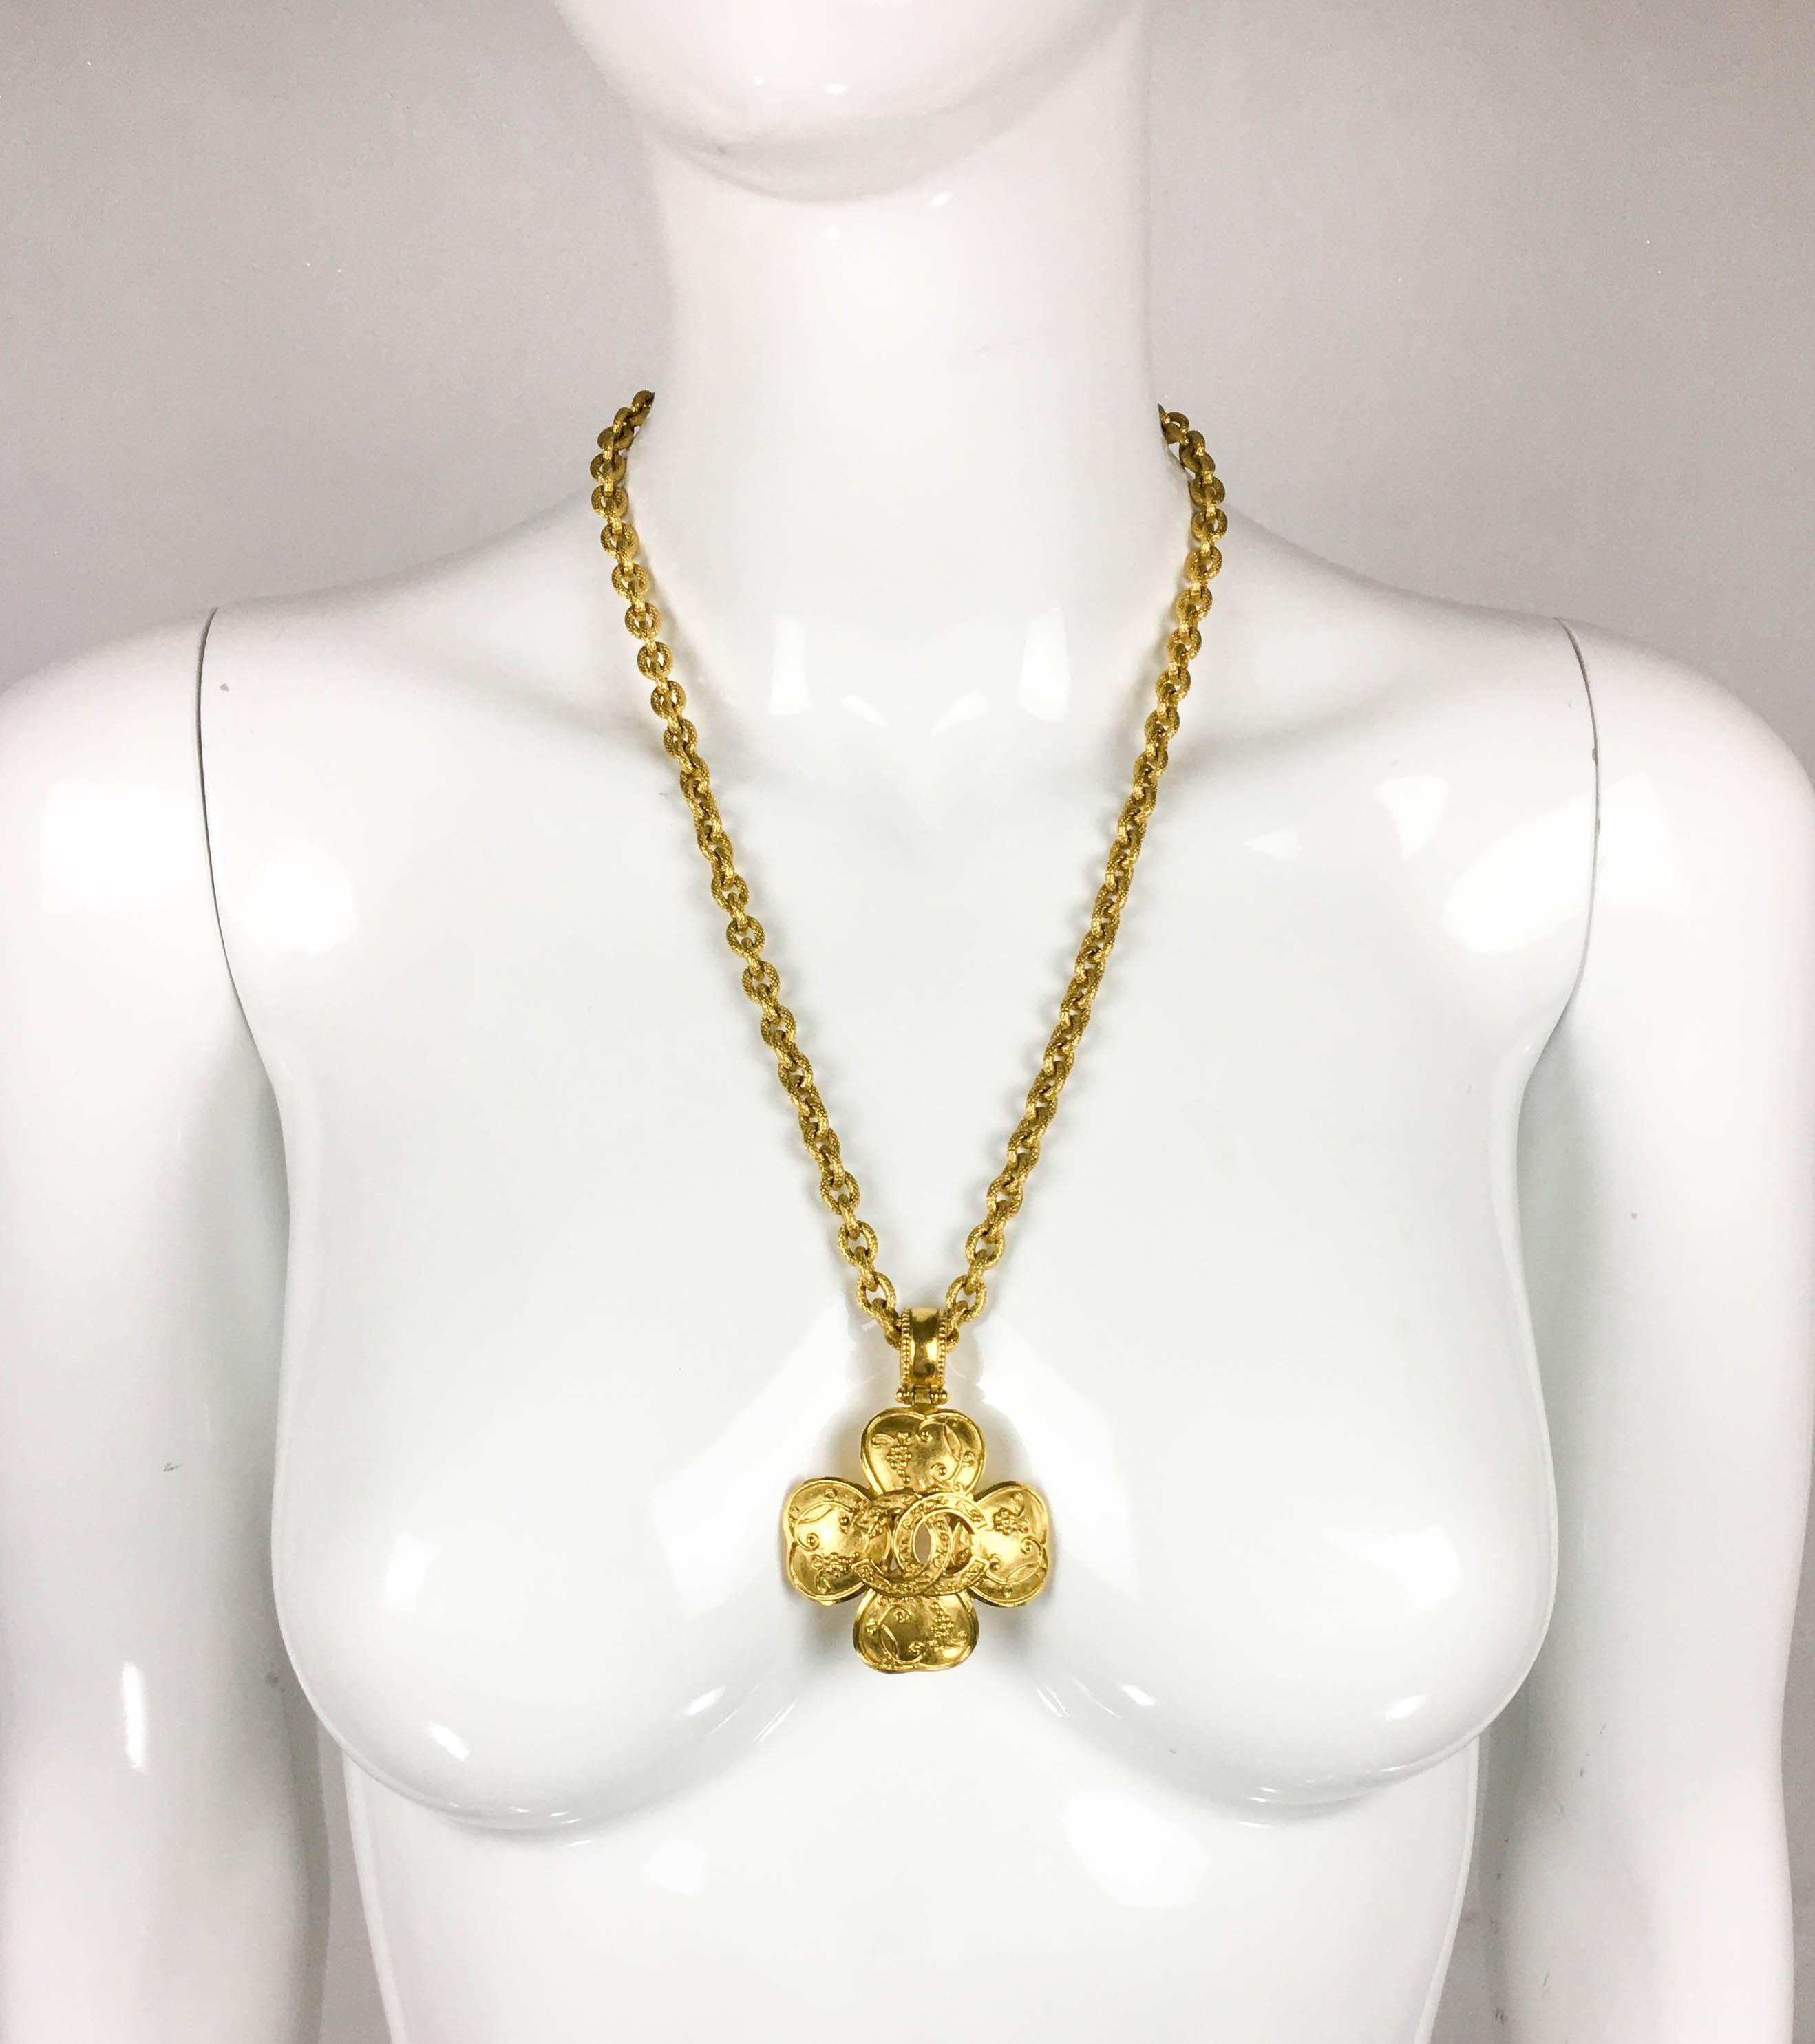 Vintage Chanel Clover Pendant Necklace. This beautiful piece by Chanel was created for the 1996 Autumn / Winter Collection. Gold-plated, it consists of a chain and pendant. The clover-shaped pendant bears the iconic ‘CC’ logo in the centre and